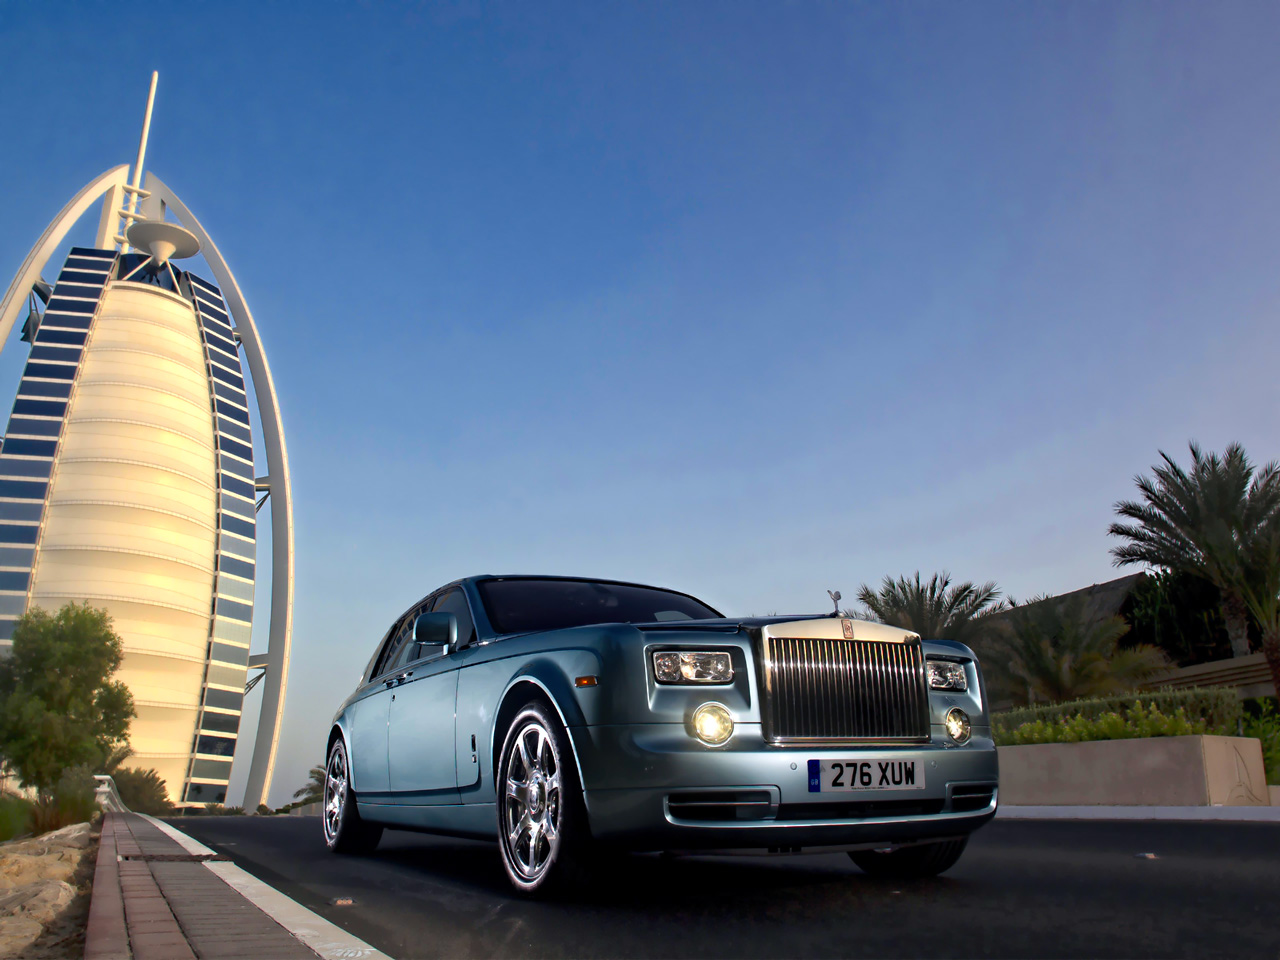 A Perfect Travel Guide For Dubai In Luxurious and Comfortable Cars